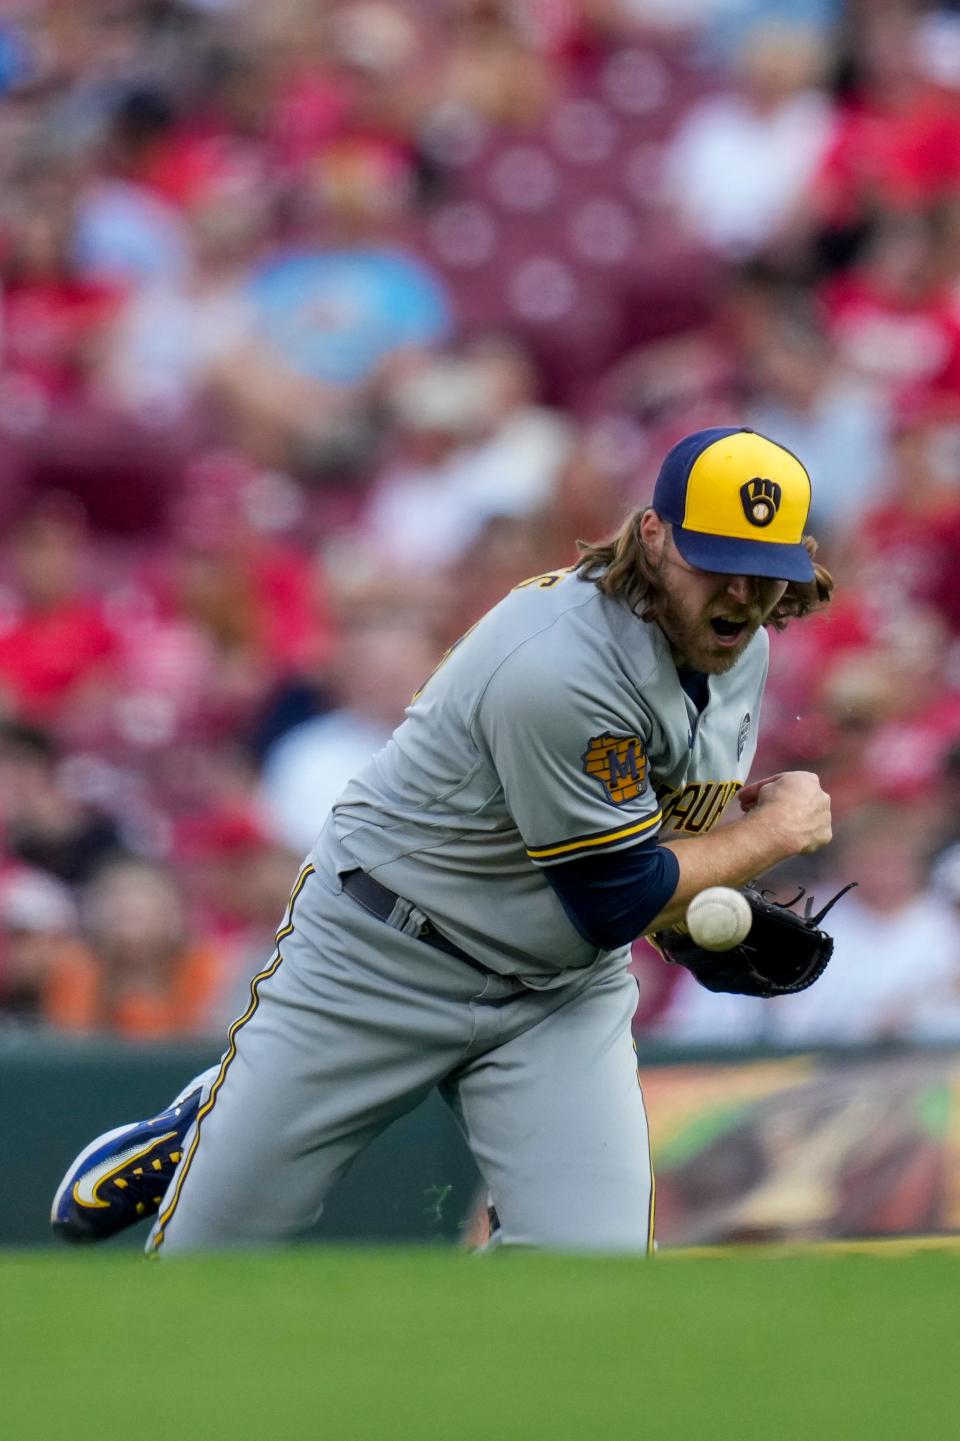 Corbin Burnes, who beat the Reds in his last start, expects the Reds and Brewers to be buyers in the next two weeks.